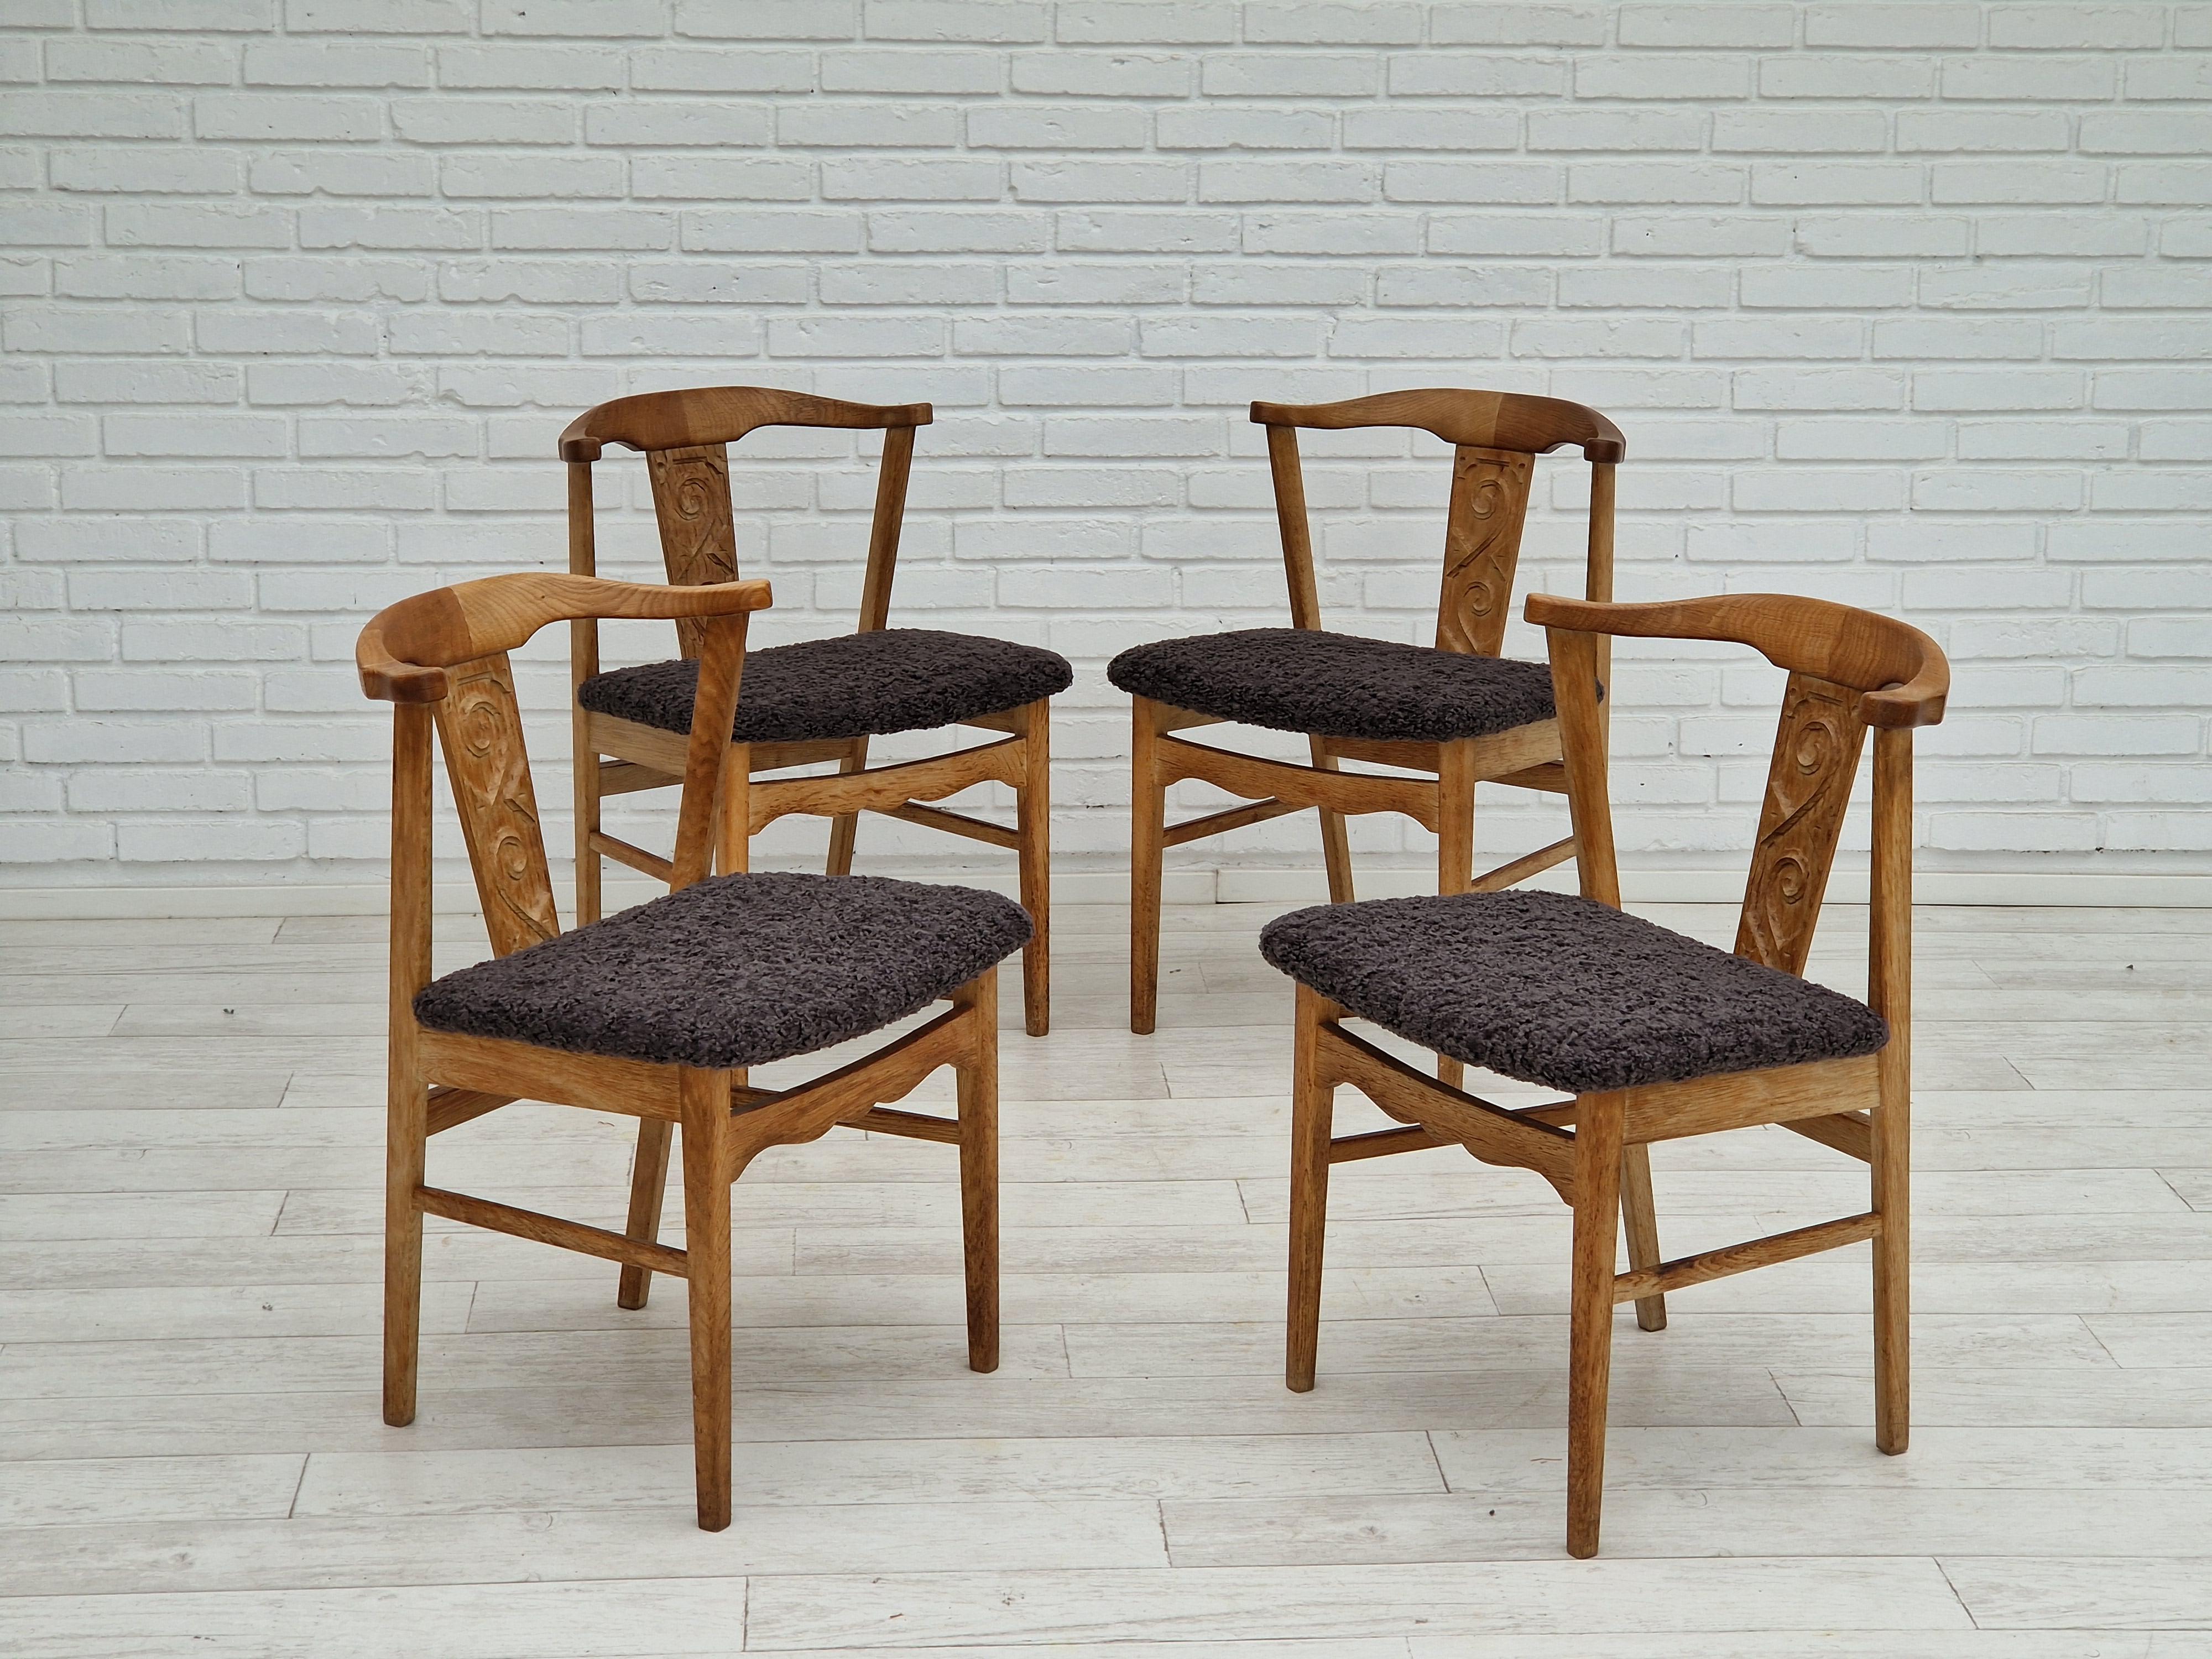 1960s, Danish Design, Set of 4 Dinning Chairs, Oak Wood, Reupholstered For Sale 1